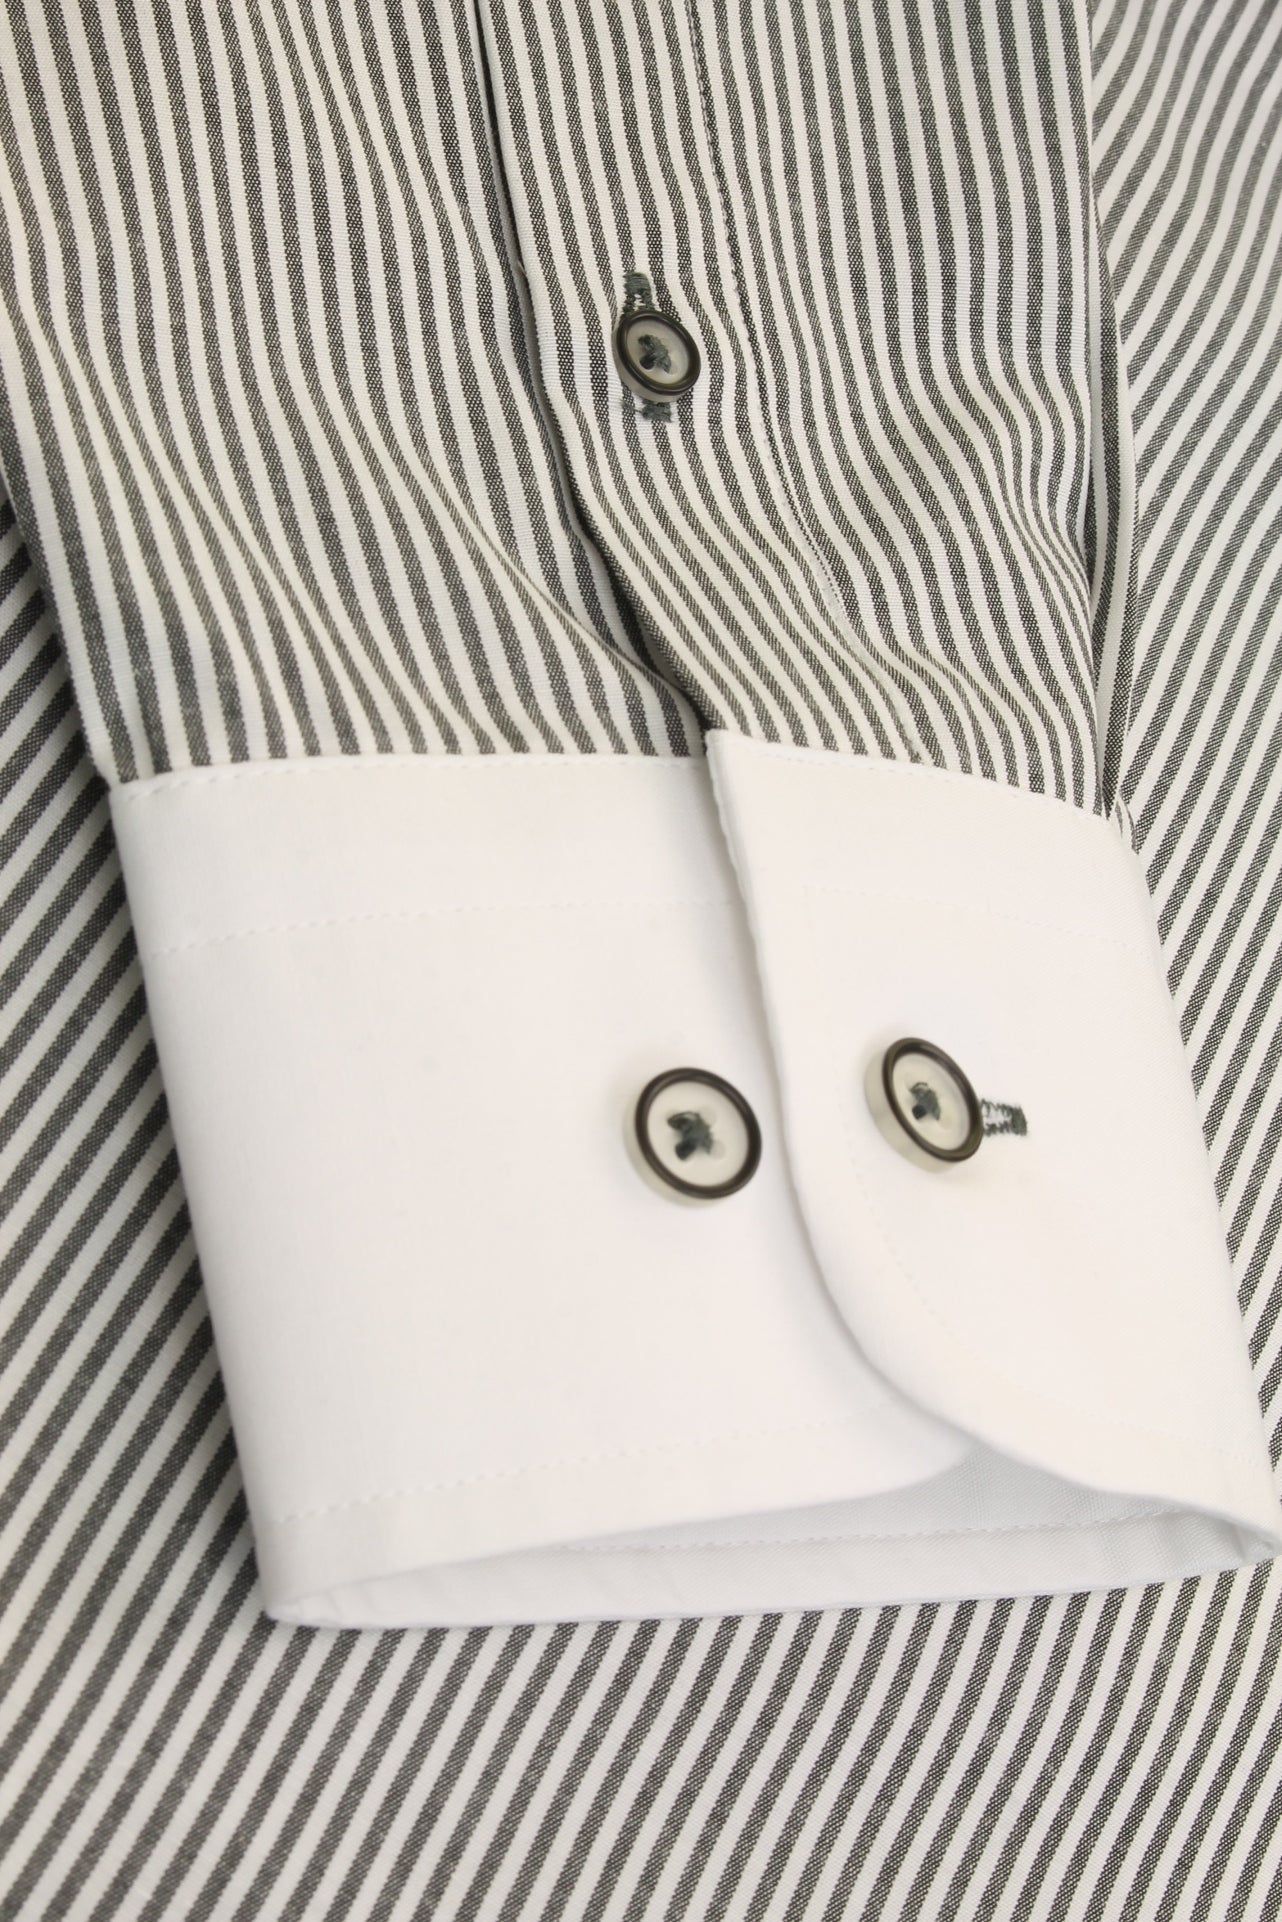 Xact Men's Long-Sleeved Striped Shirt with White Penny/Club Collar and White Cuffs